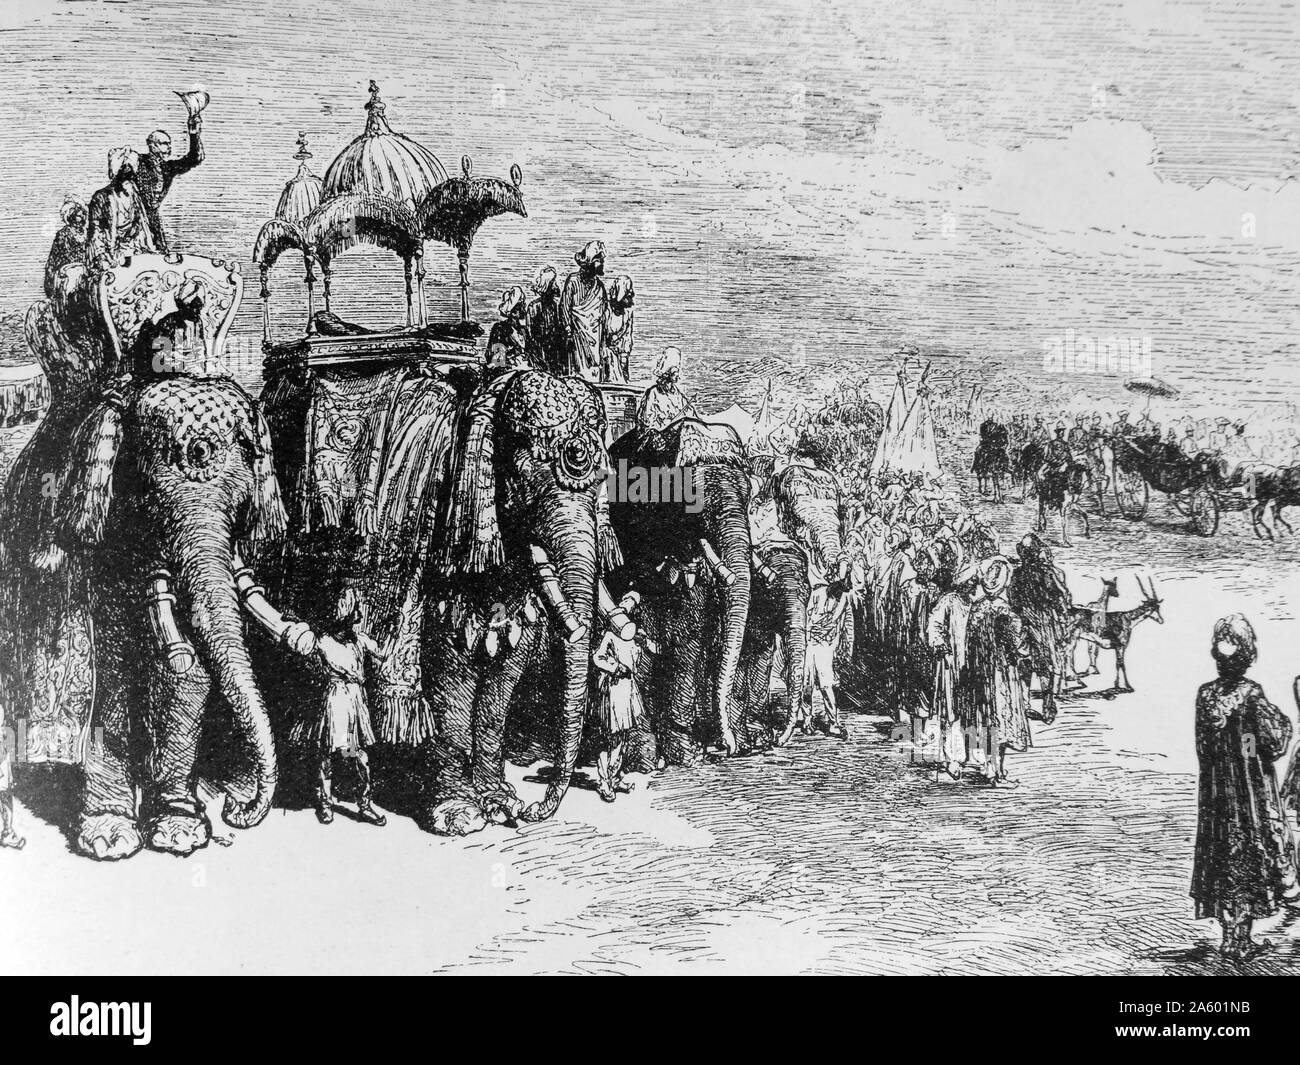 State entry of the prince of wales (later King Edward VII) into Lahore, during his tour of India (and Pakistan) 1876. Indian princes on decorated elephants line the route. Stock Photo